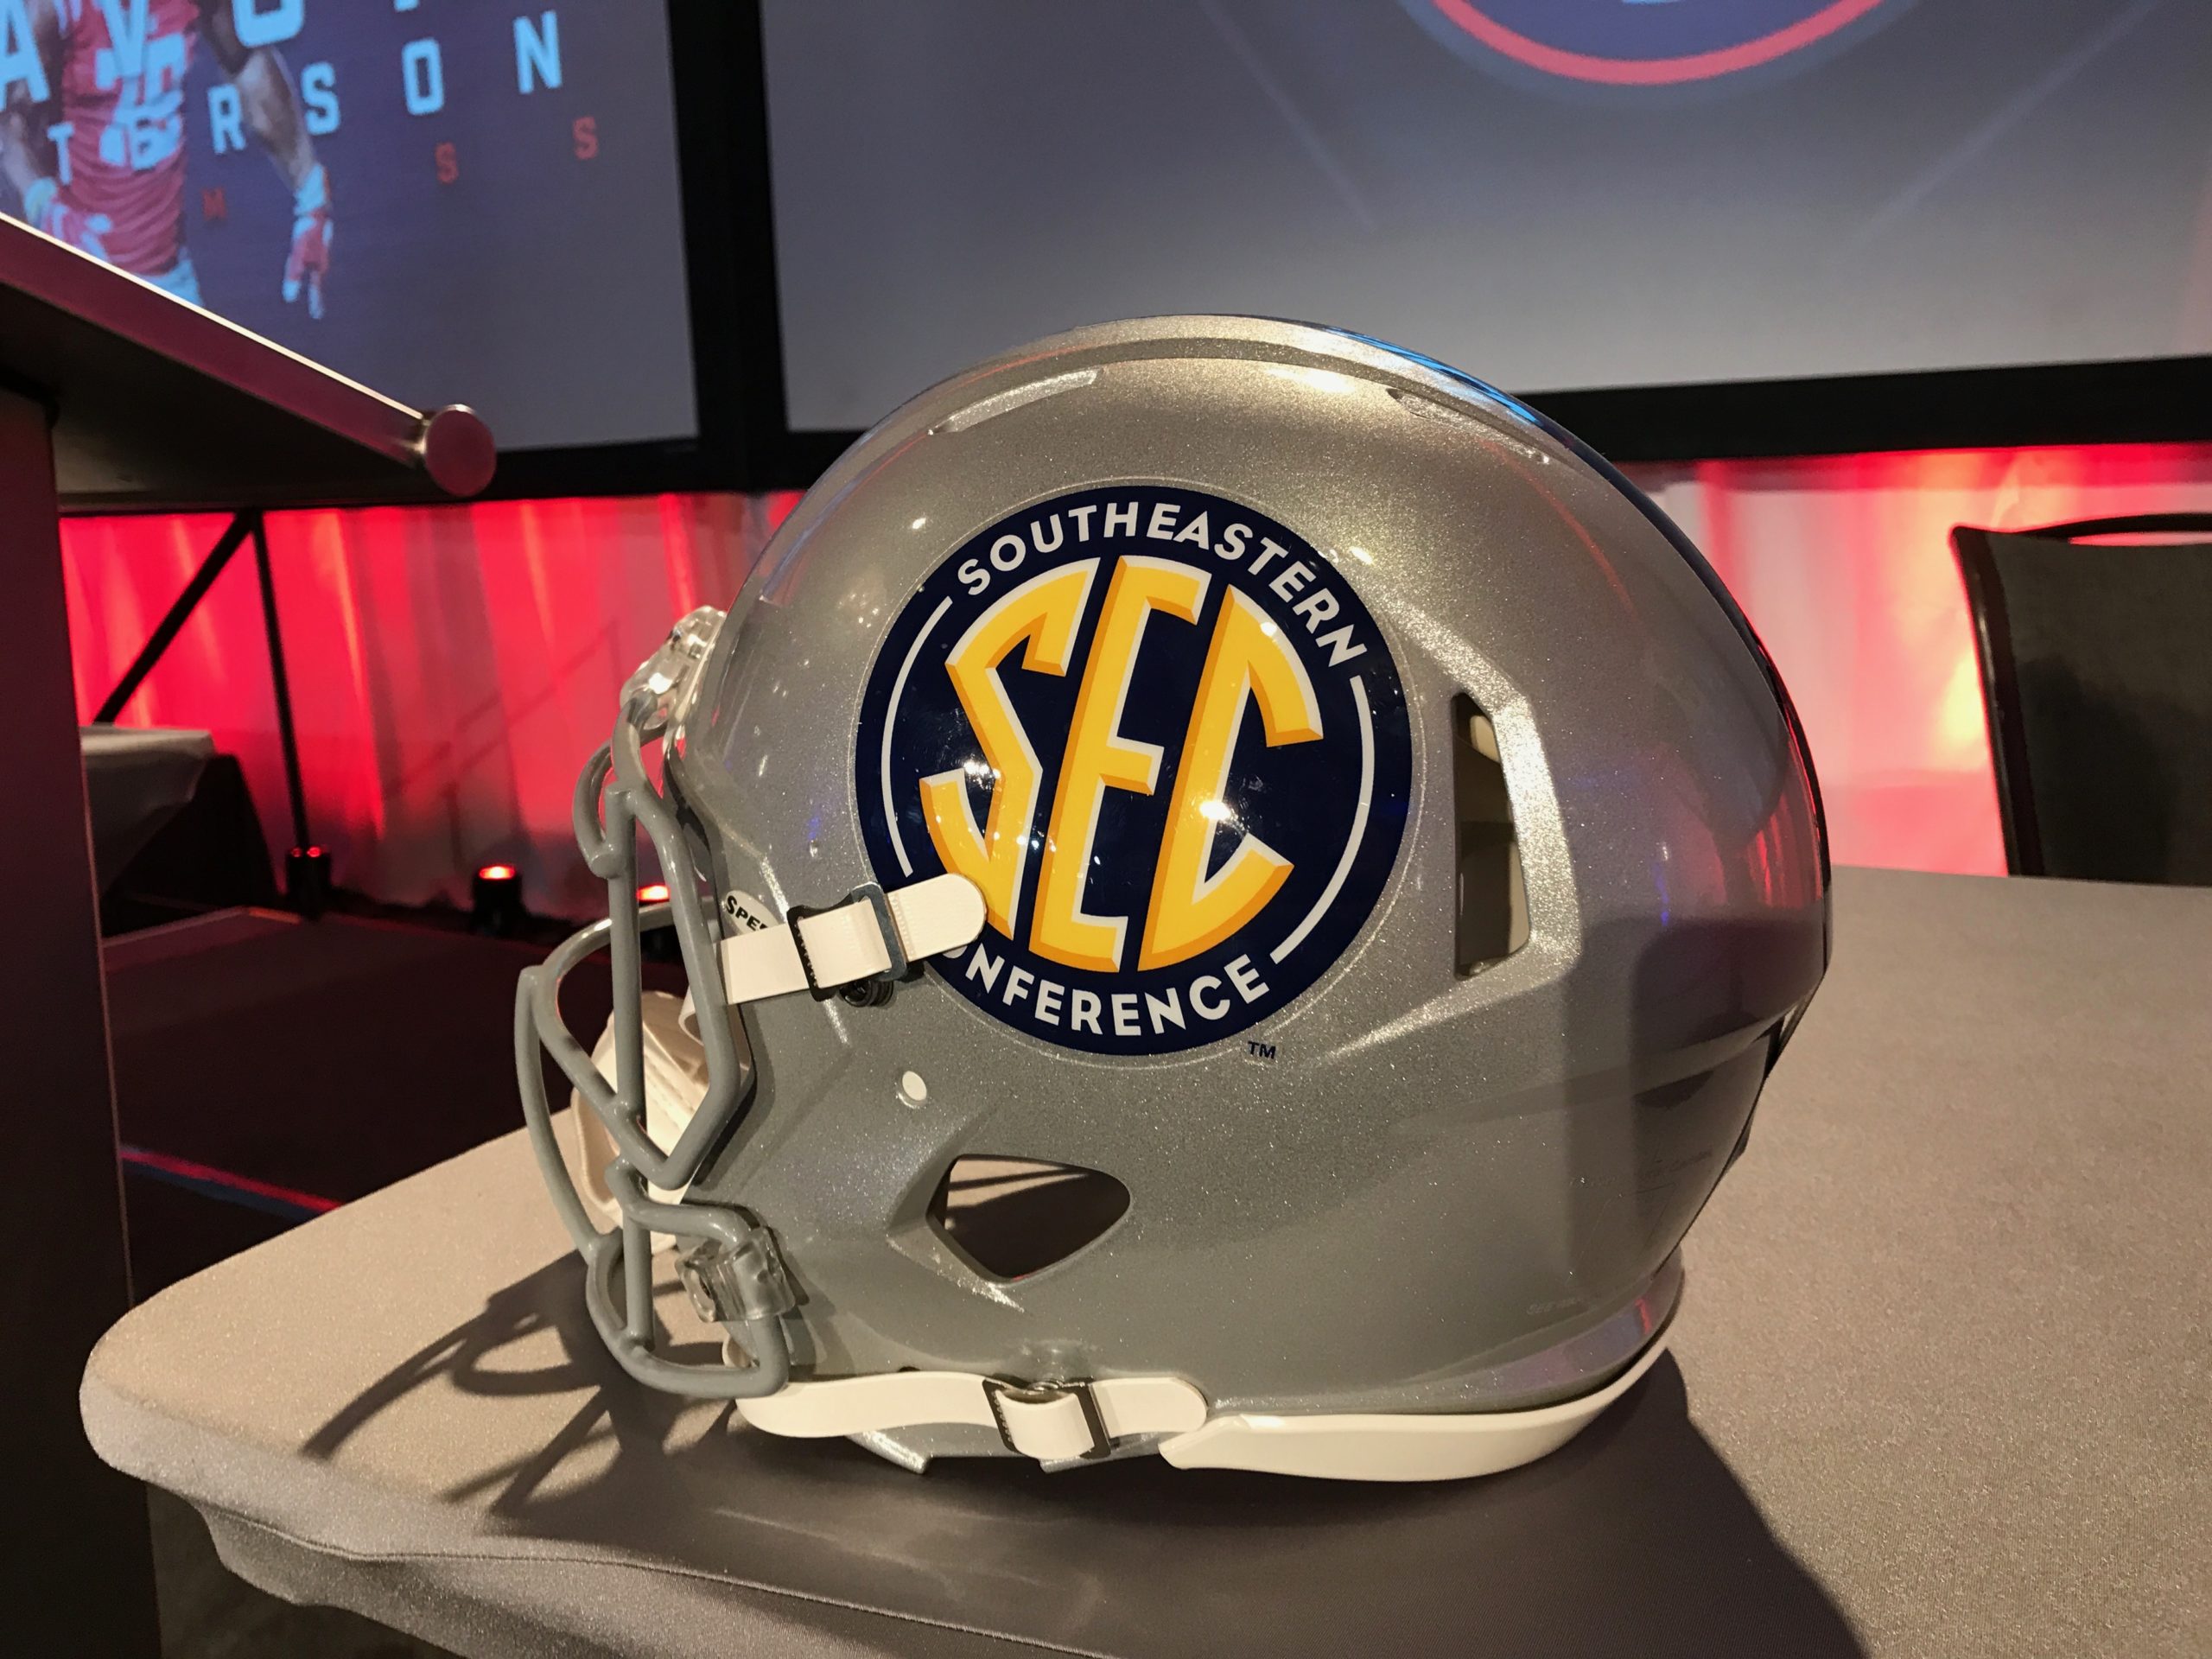 Lunce’s List (3/27/18) – The five most interesting SEC spring story lines outside Alabama